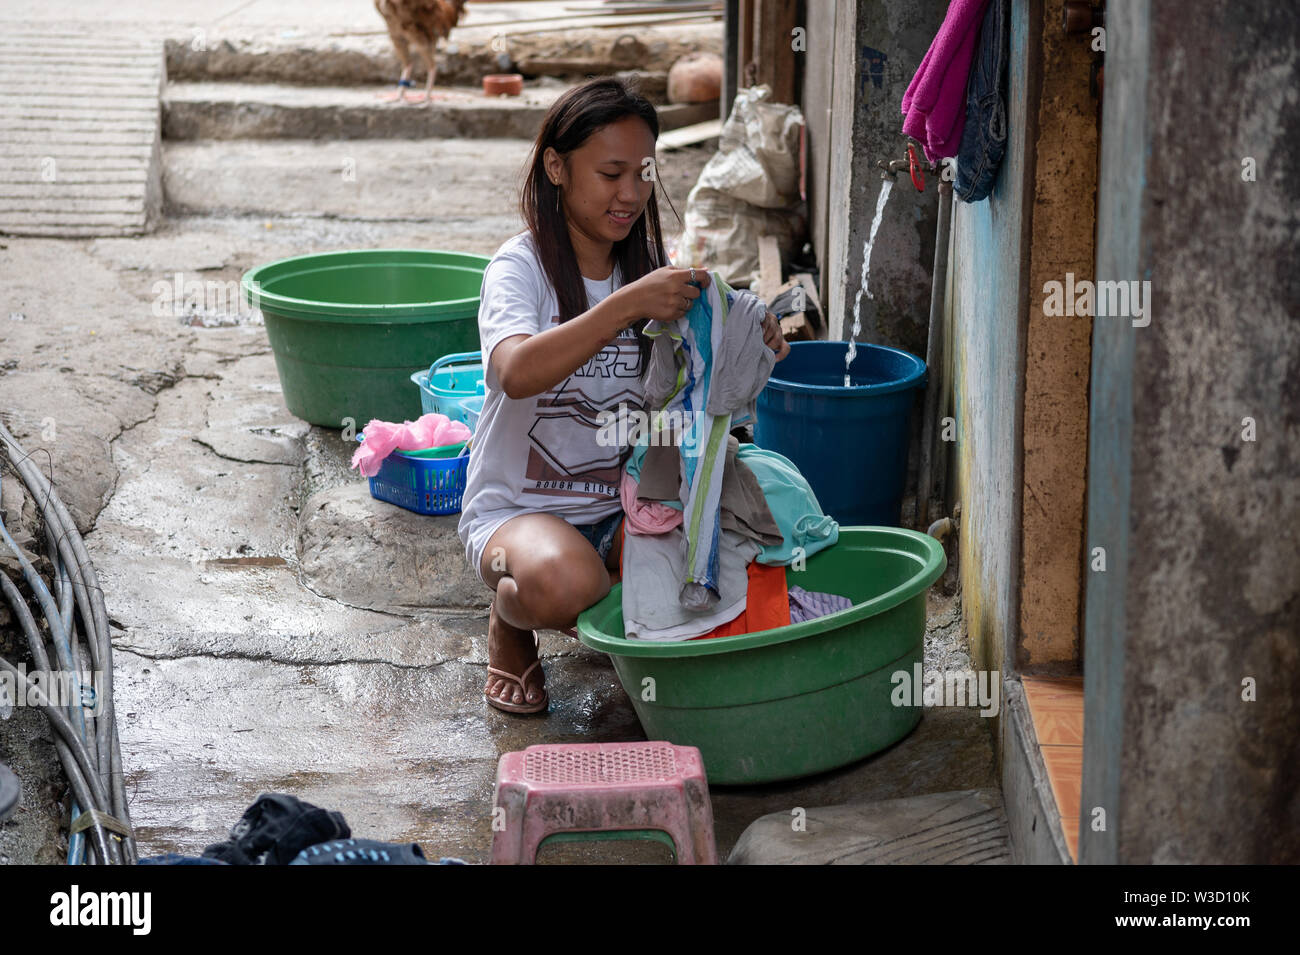 https://c8.alamy.com/comp/W3D10K/a-young-girl-washes-clothes-by-hand-within-a-local-poor-communitycebu-cityphilippines-W3D10K.jpg